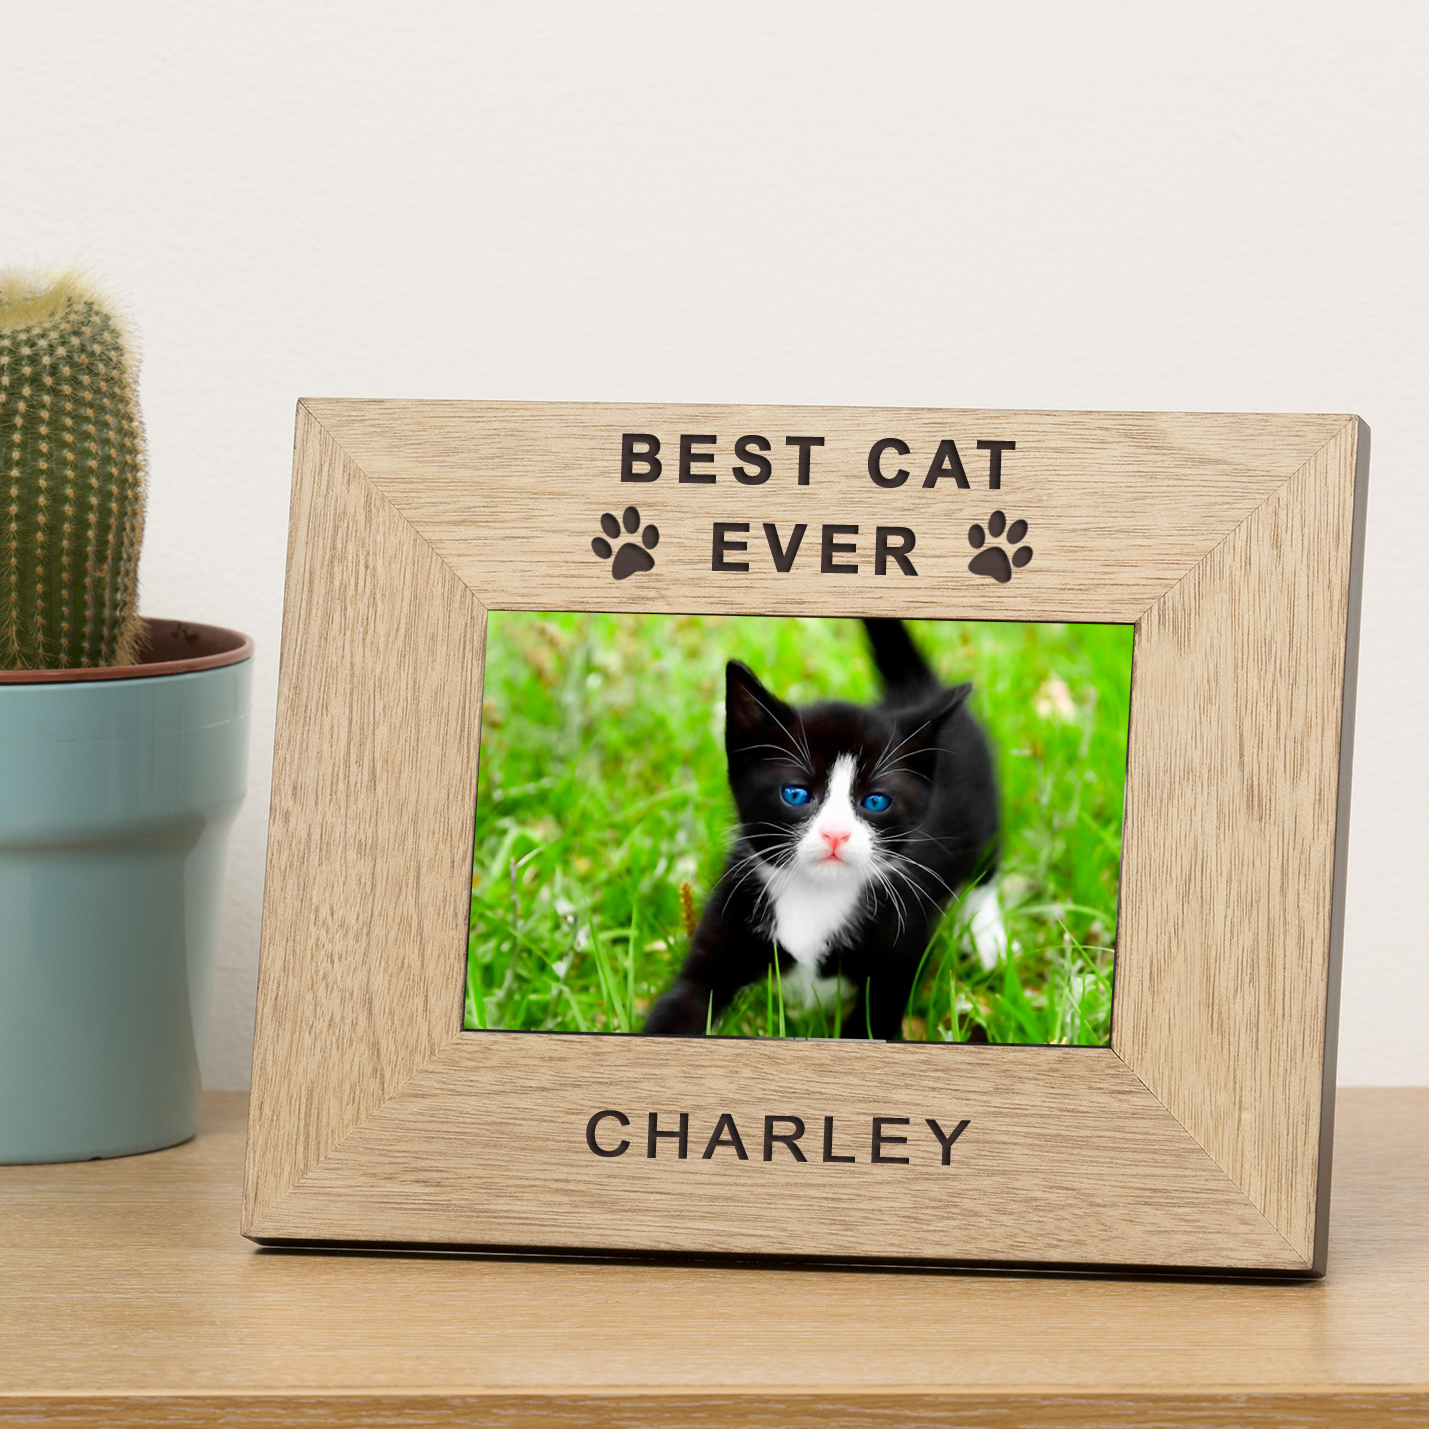 Personalised Cat Photo Frame 6 x 4 inch – Best Cat Ever - MyPamperedPet